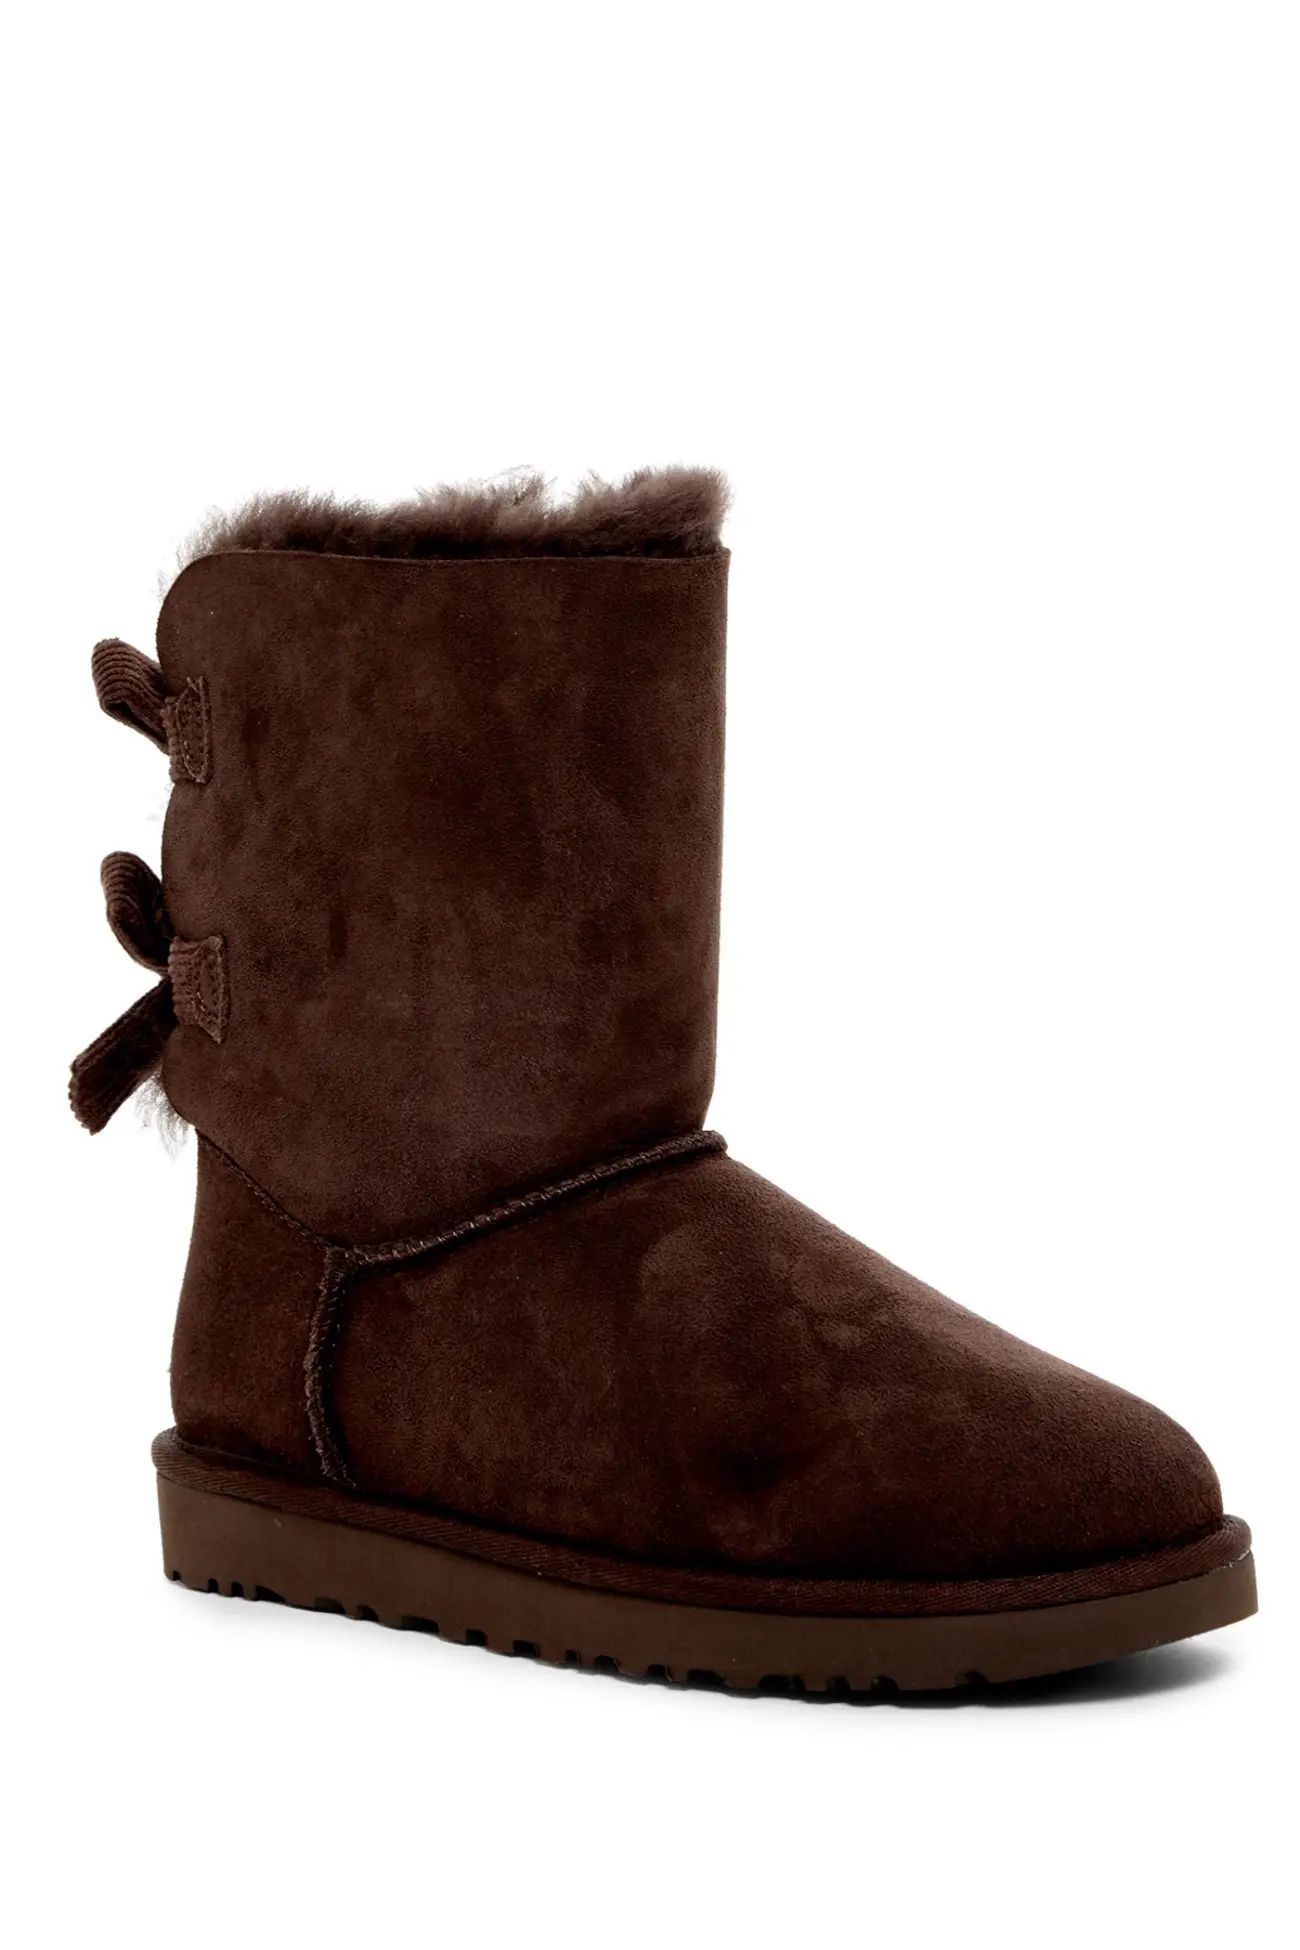 UGG | Bailey Twinface Genuine Shearling &  Bow Corduroy Boot | Nordstrom Rack | Nordstrom Rack